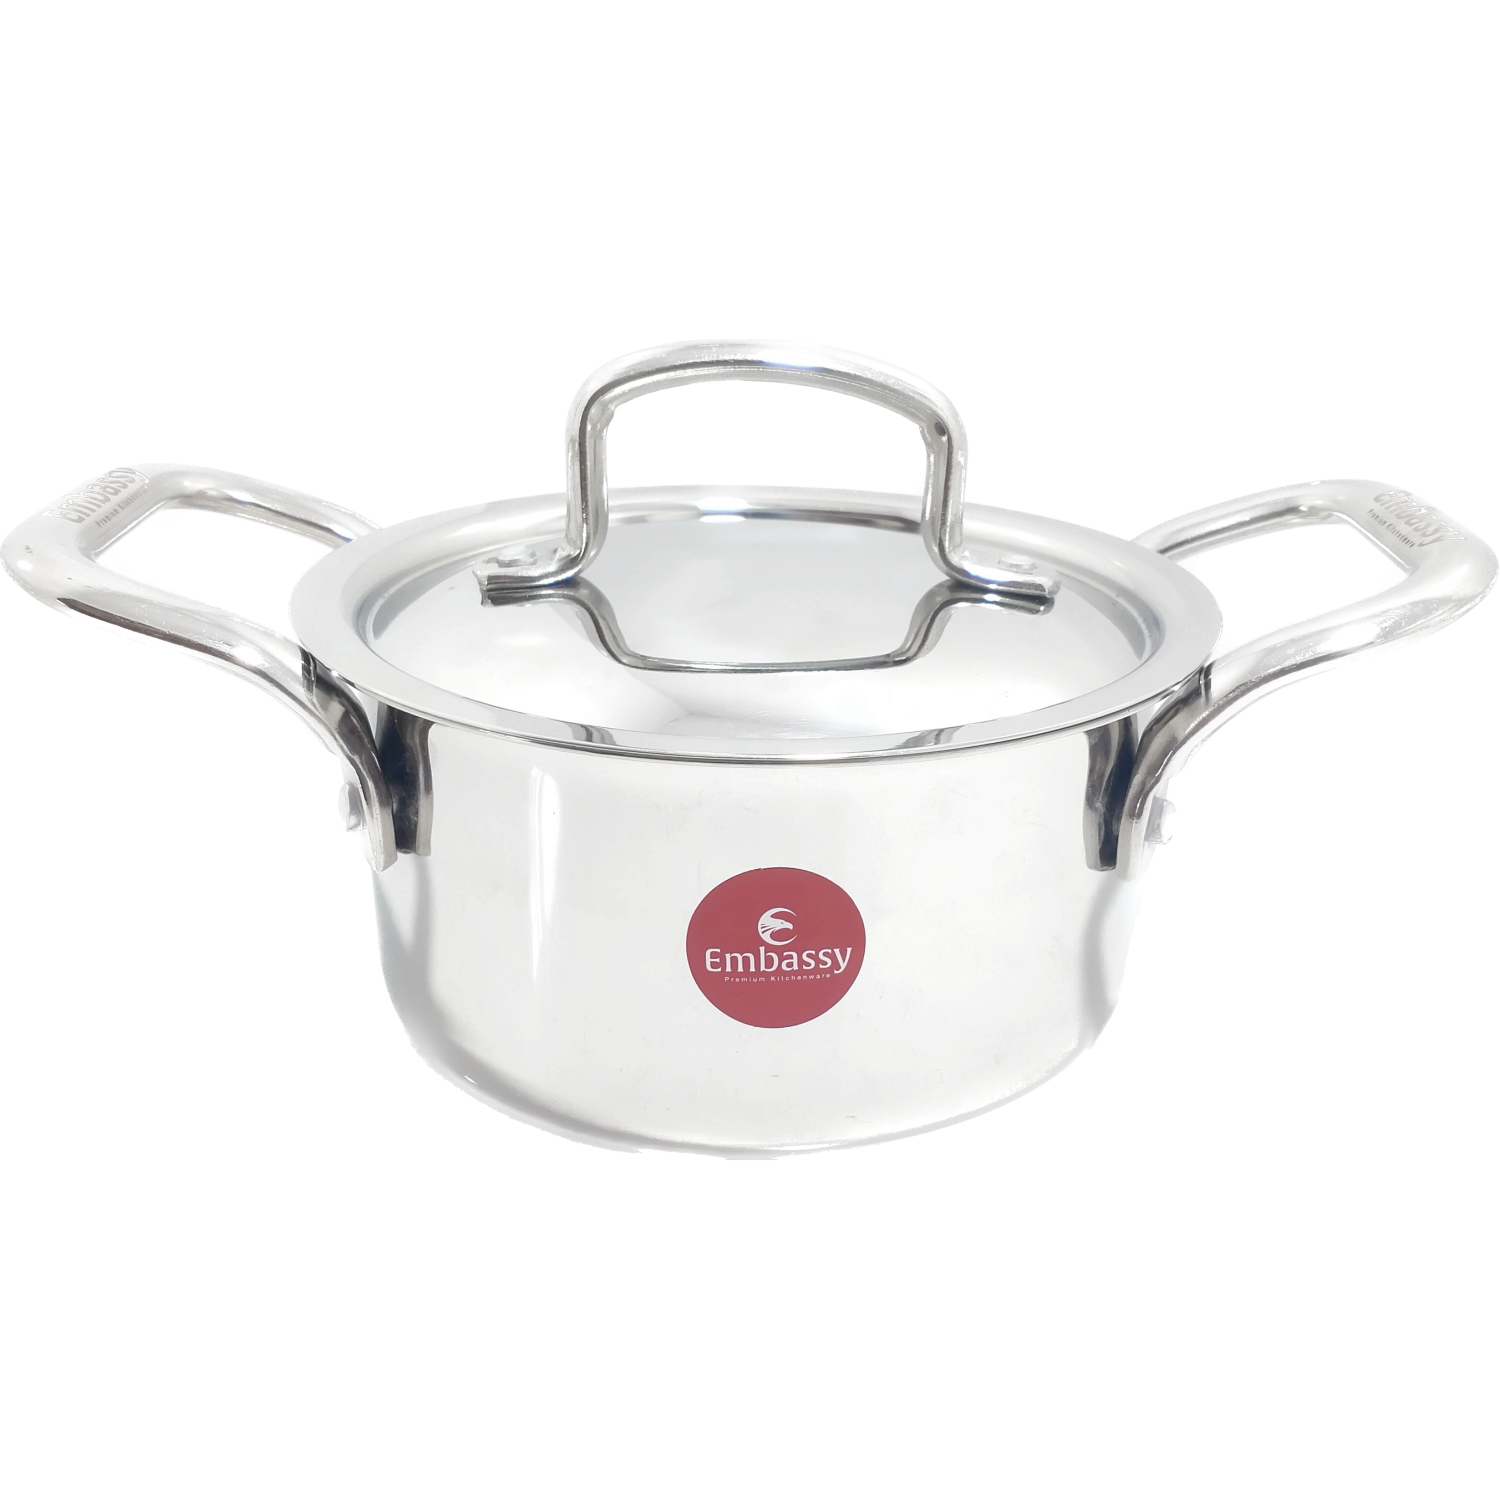 Embassy Stainless Steel Thickply Casserole with Lid Size 13 -18cm